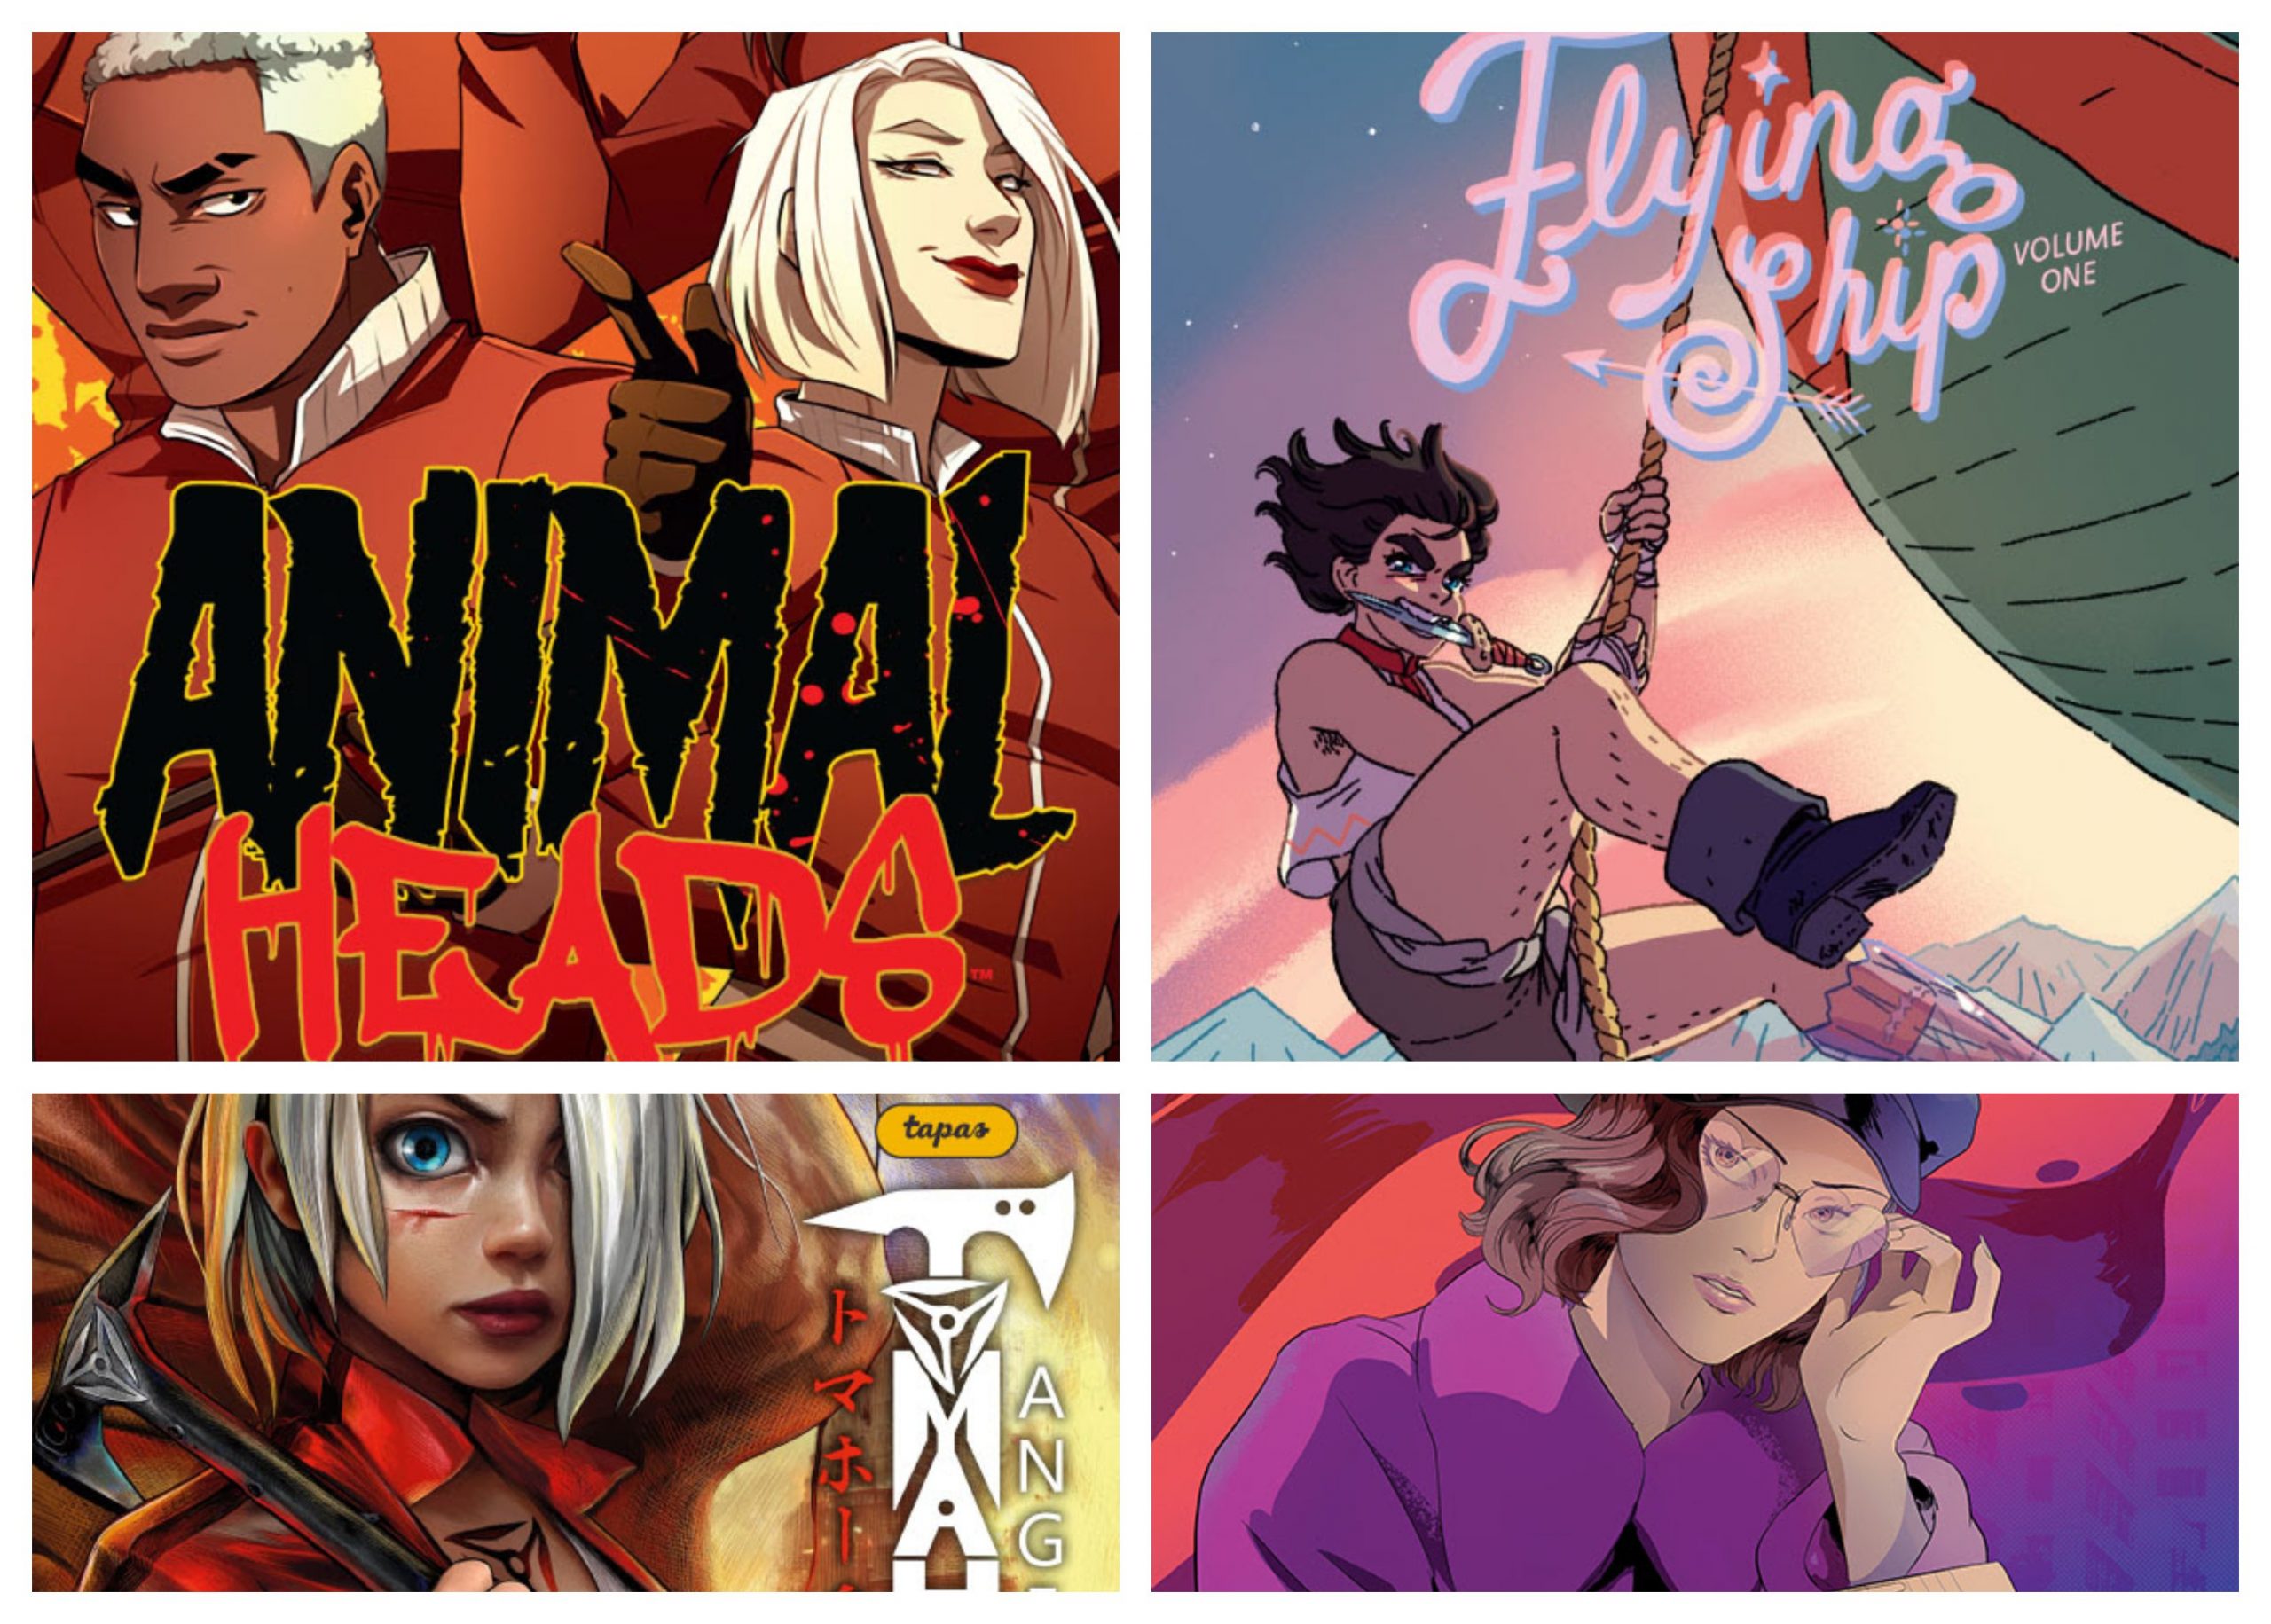 Dark Horse Books and Tapas team up to publish webcomics in 2023